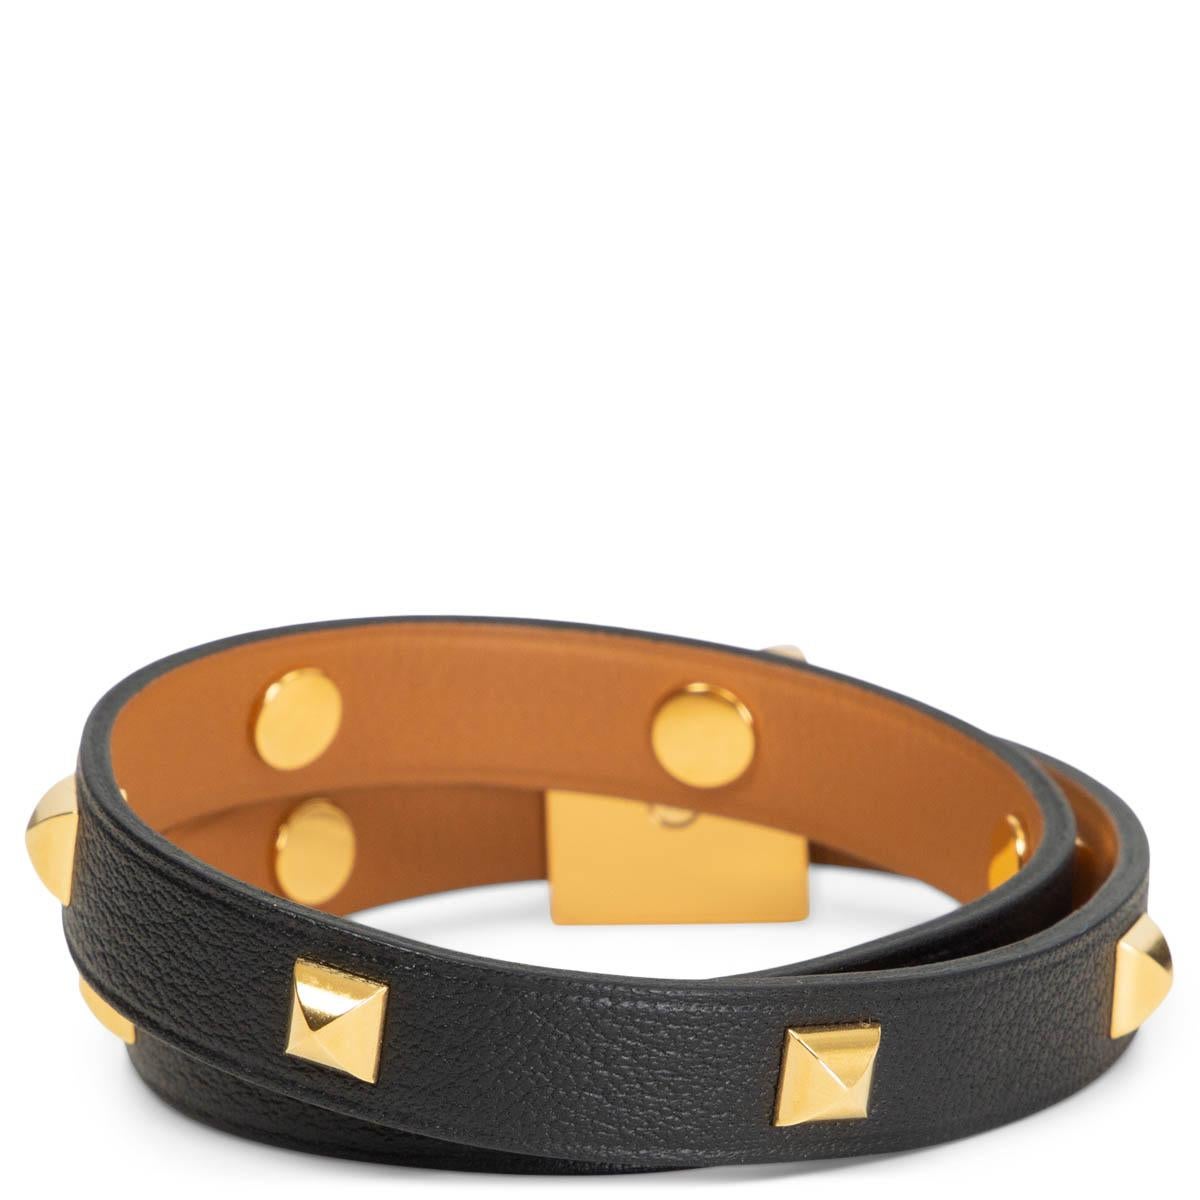 100% authentic Hermès Infini Clouté Double Tour Bracelet in Noir Veau Swift leather in size T2 with gold-tone hardware. Brand new. No Box.

Measurements
Tag Size	T2
Width	0.9cm (0.4in)
Length	34.5cm (13.5in)
All our listings include only the listed